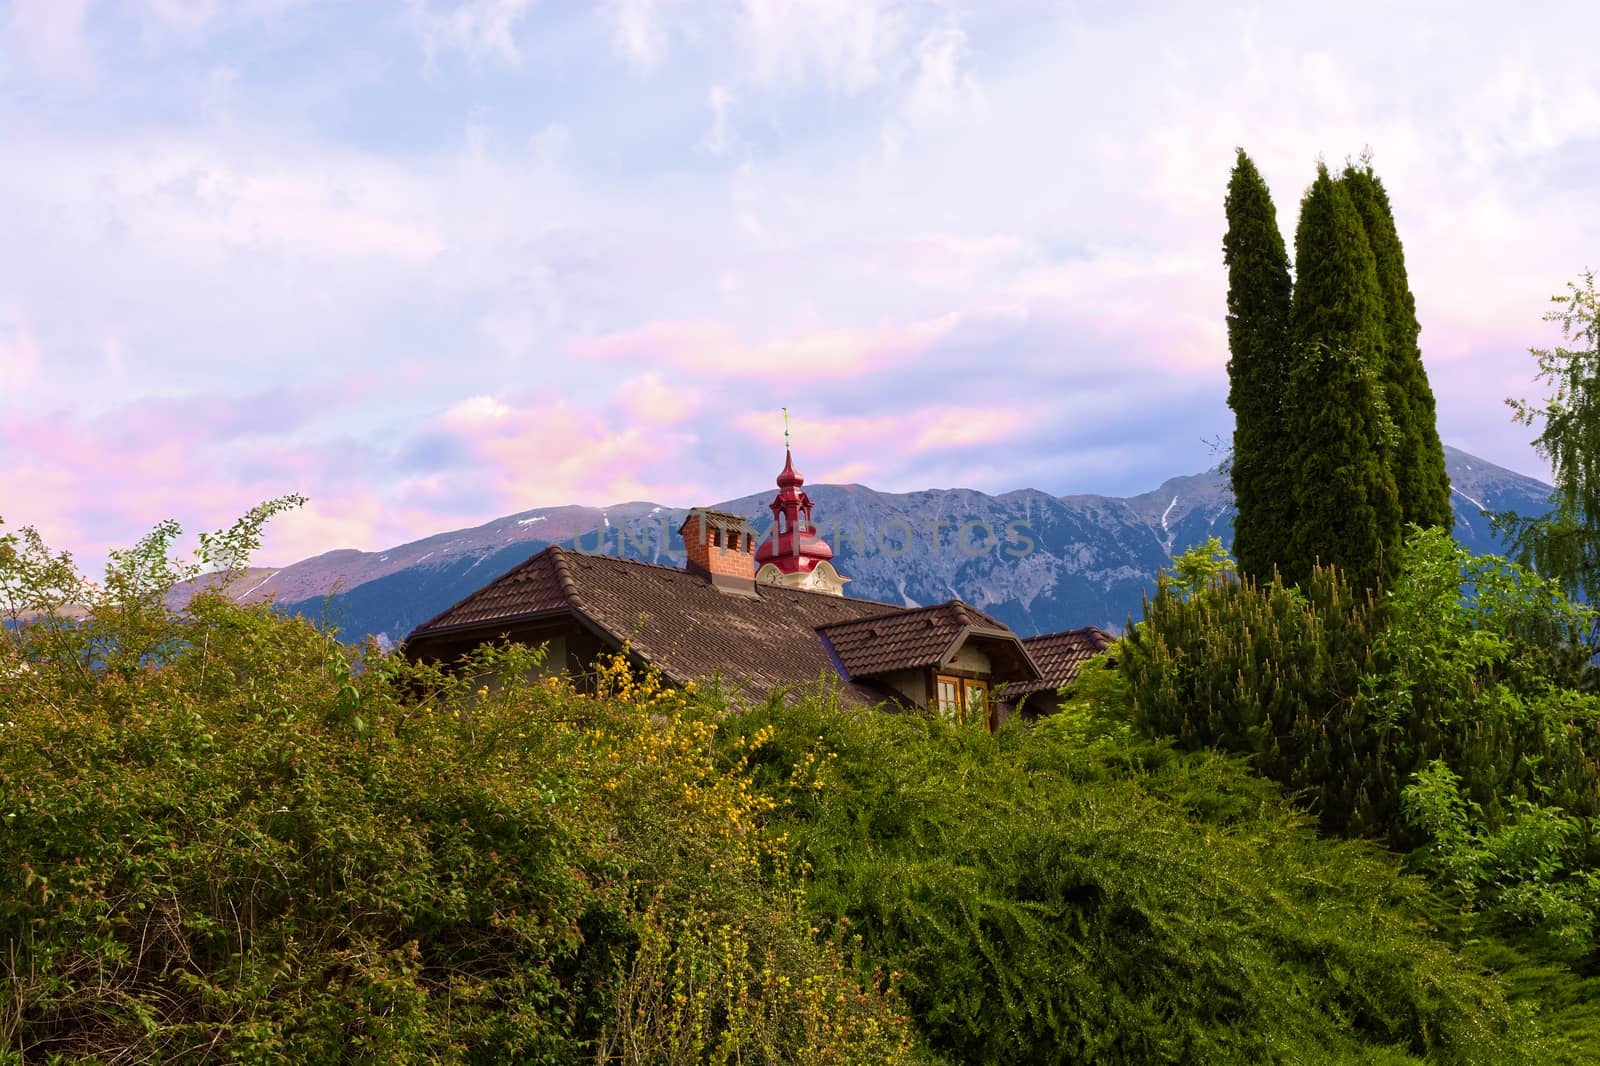 Alpine landscape with a house and a church tower, mountain and sunset on the background